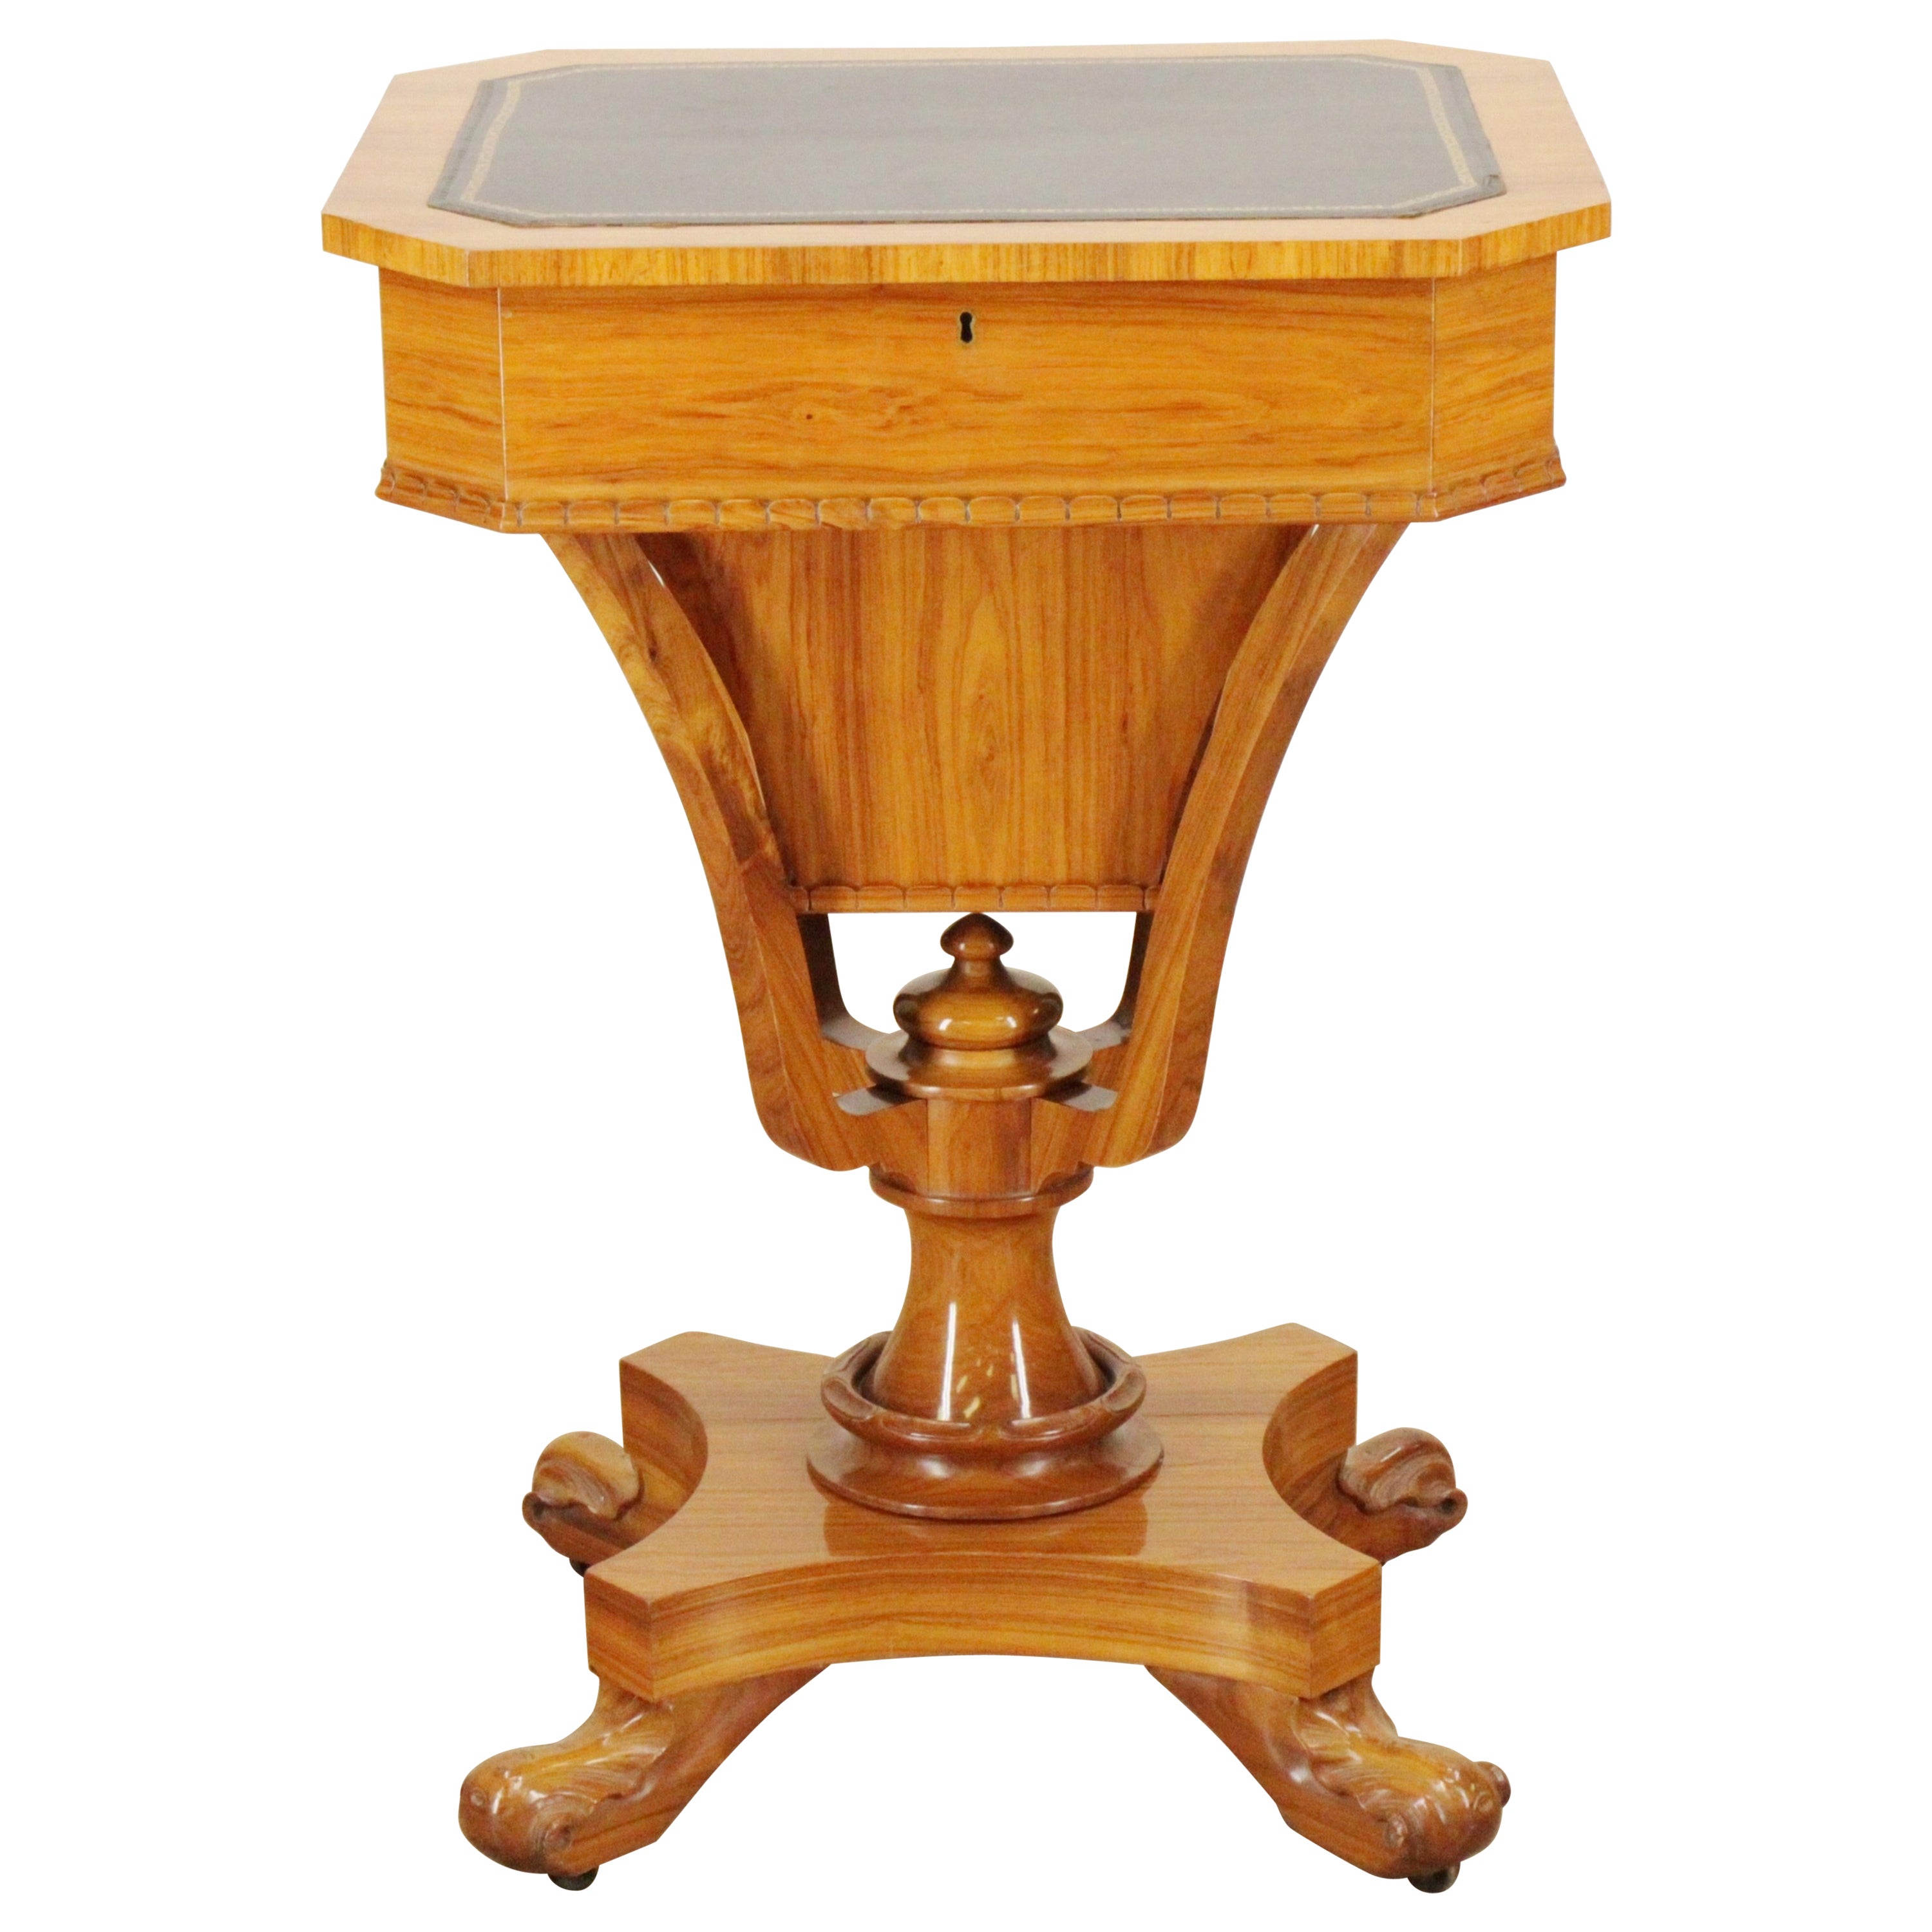 Late Regency Tulipwood & Leather Lift-Top Writing Table